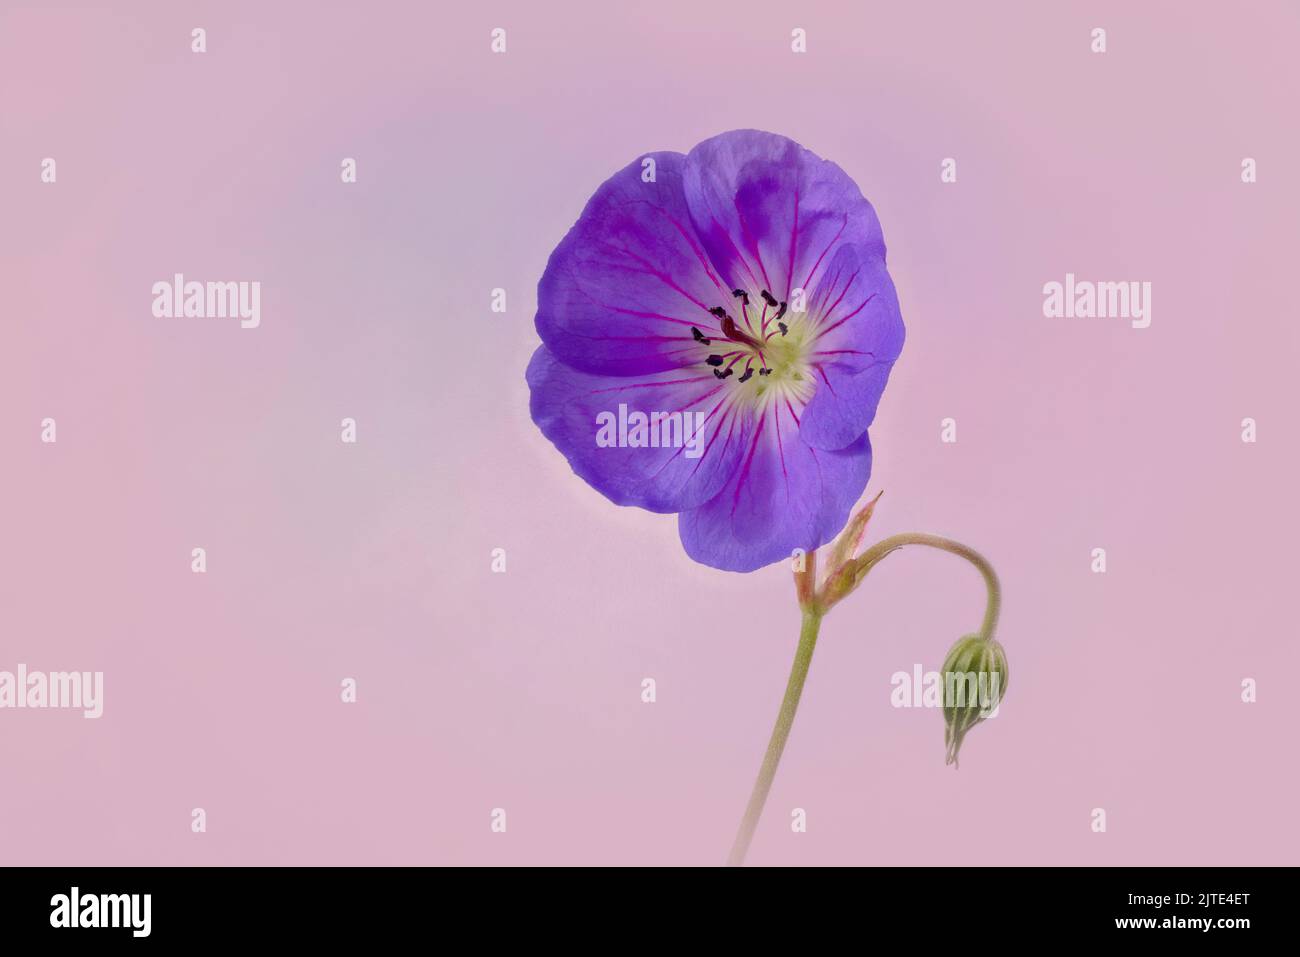 A beautiful deep purple wild Geranium, also known as Cranesbill, photographed against a light mauve/pink background Stock Photo